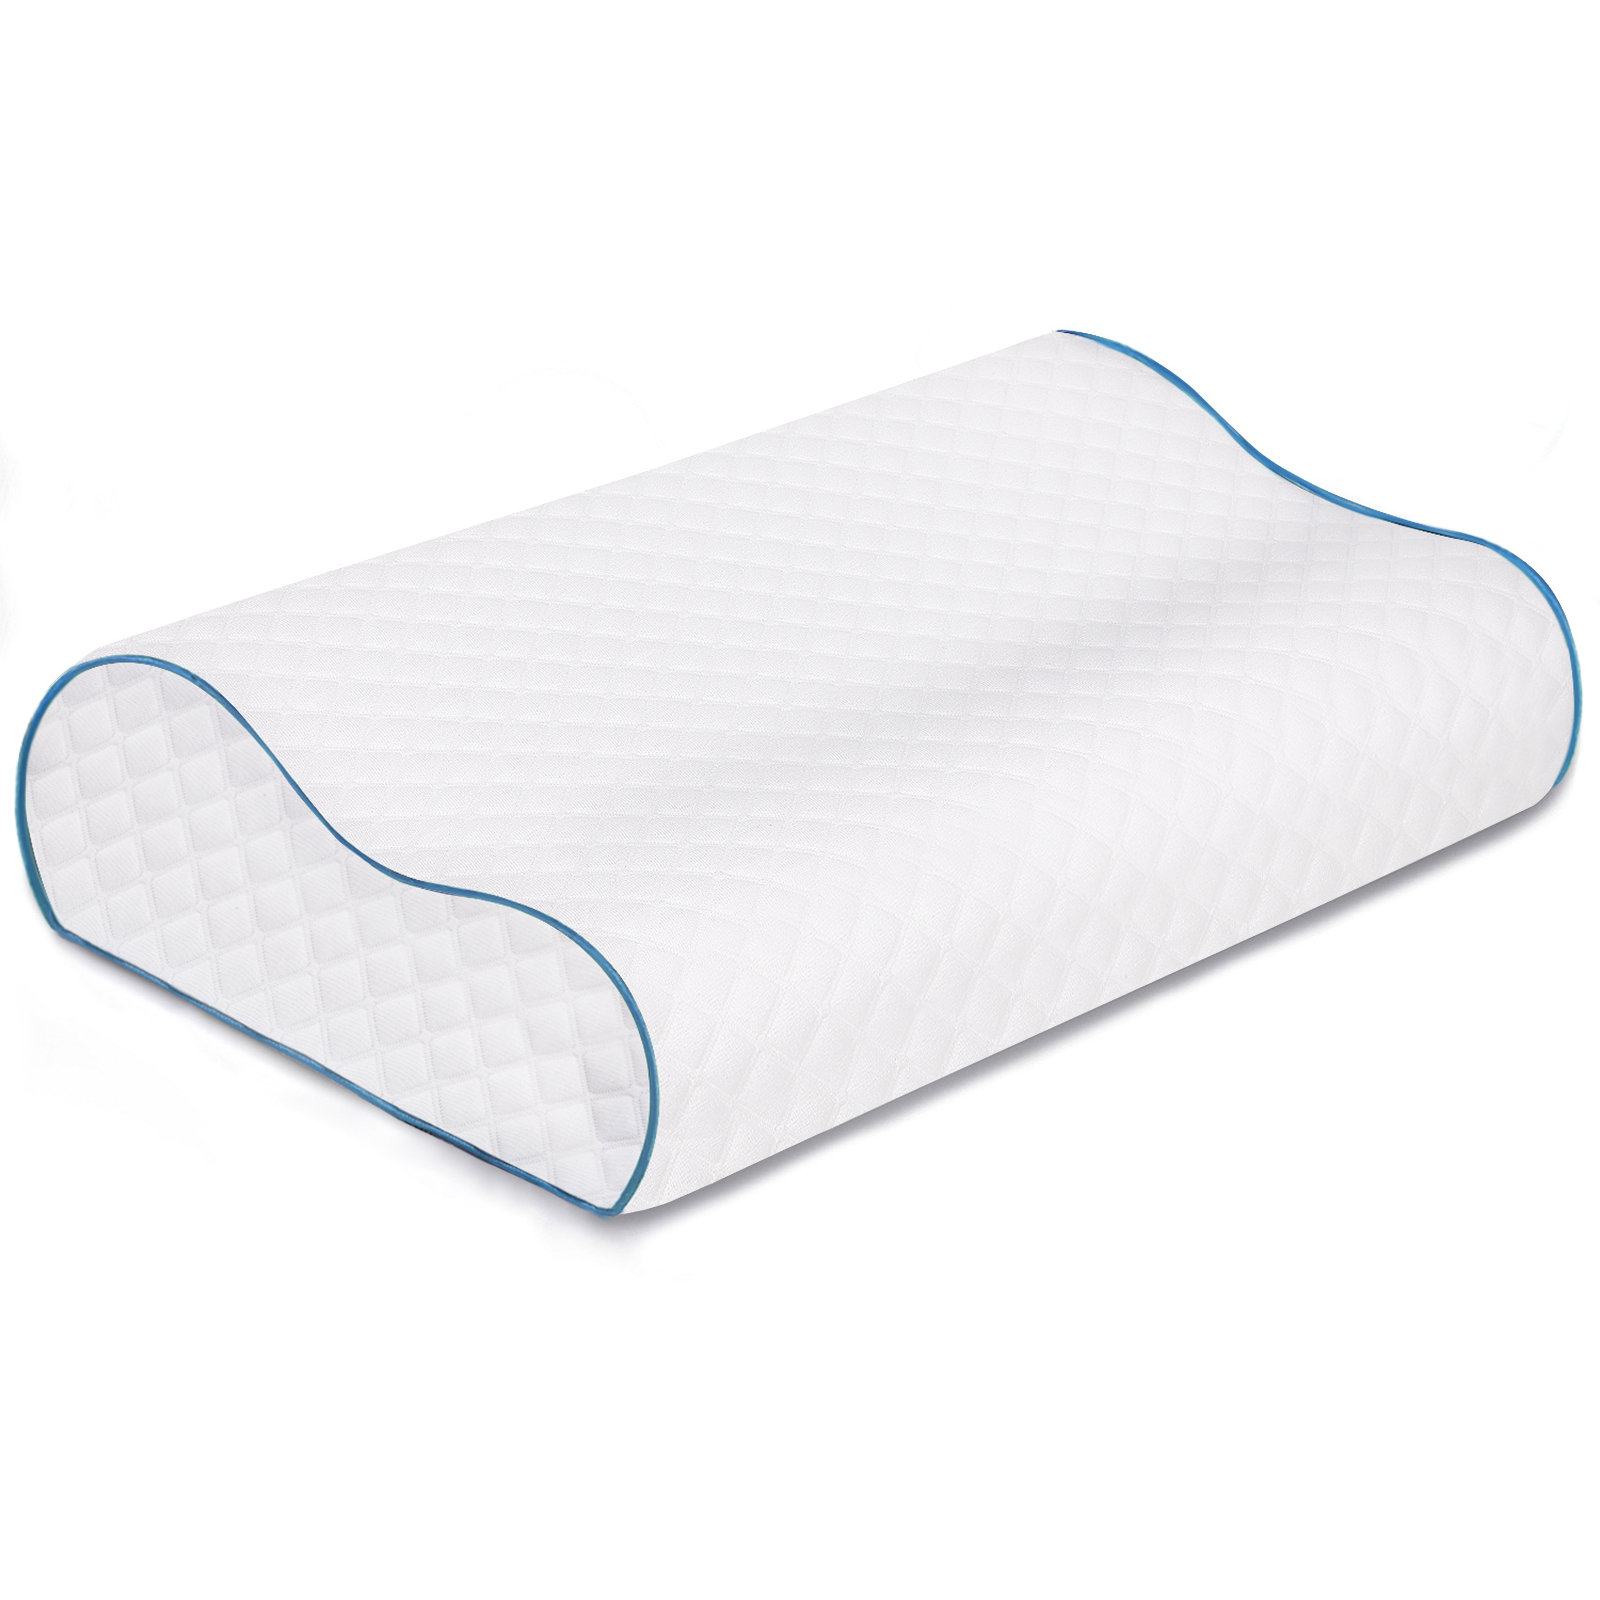 Luxury Memory Foam Firm Core Orthopaedic Support Firm Bed Pillow Anti-Bacterial 